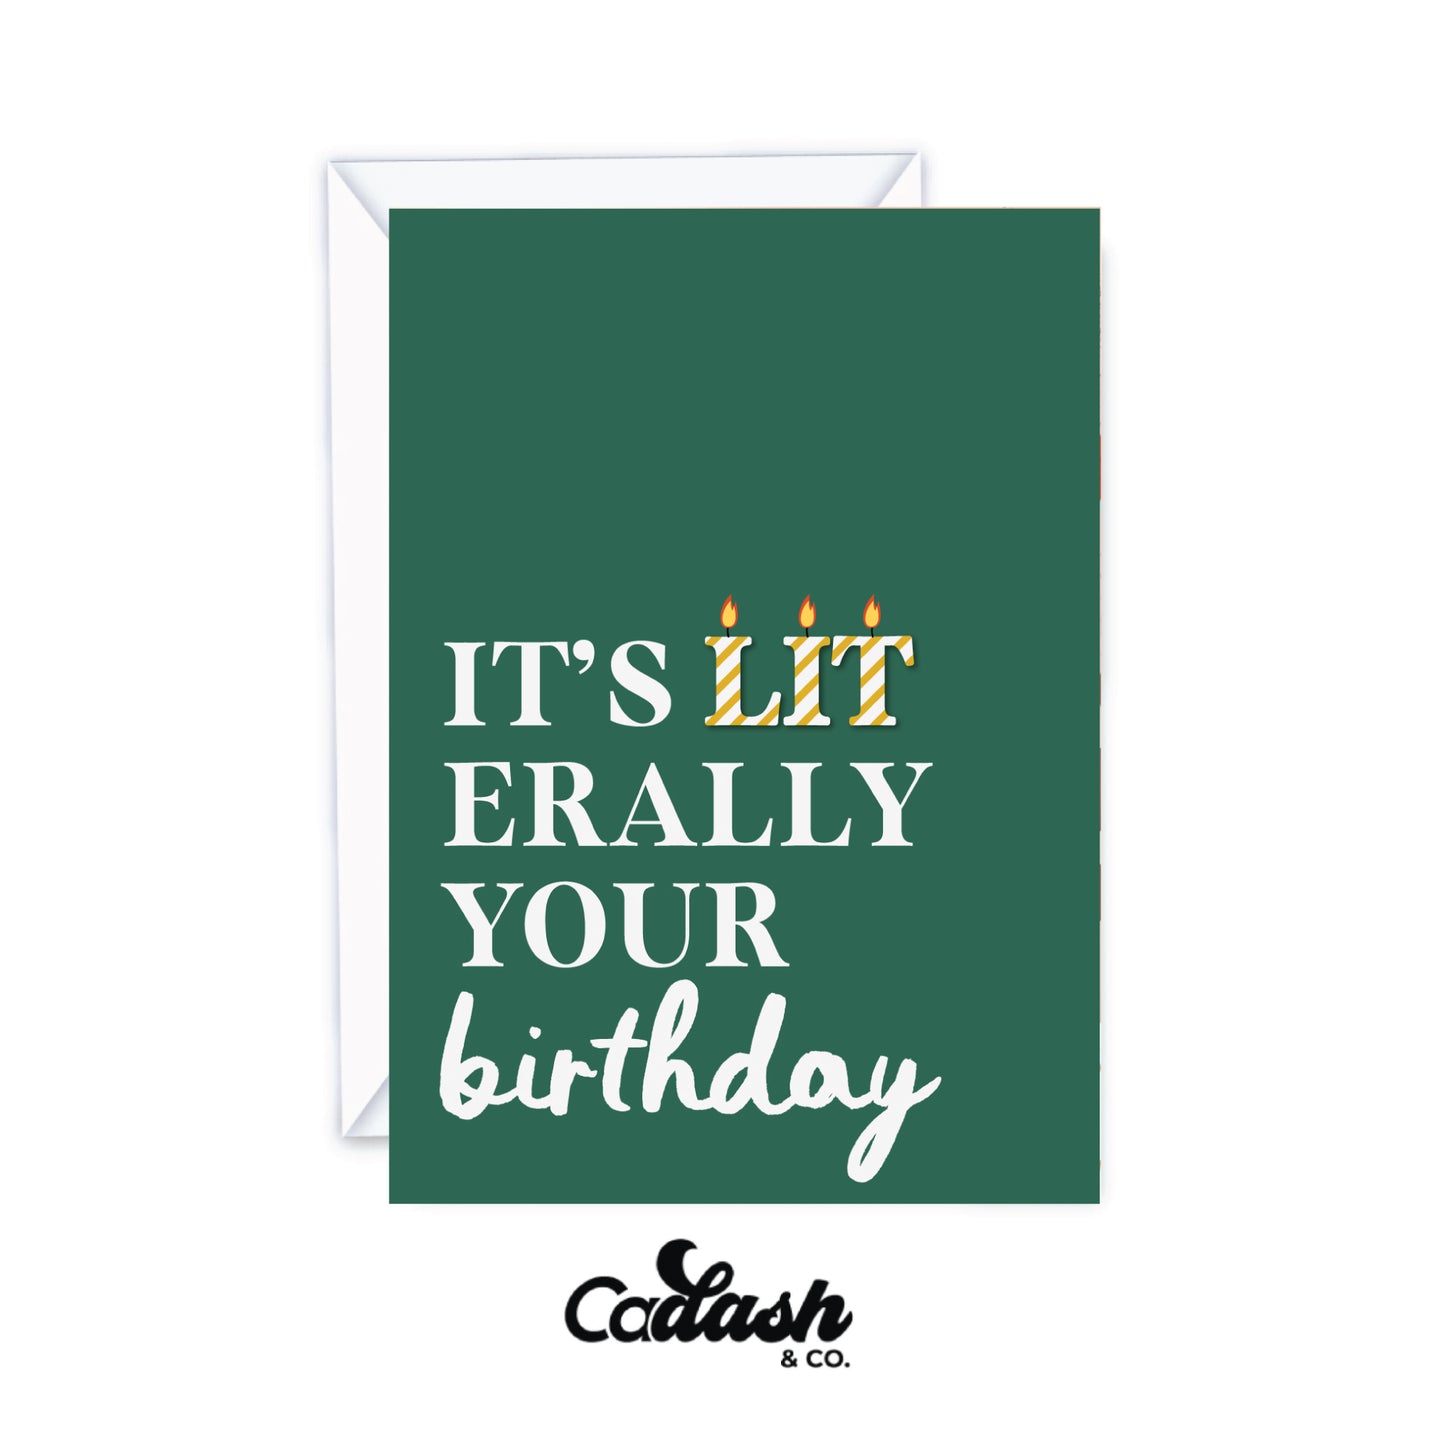 LITerally your birthday greeting card